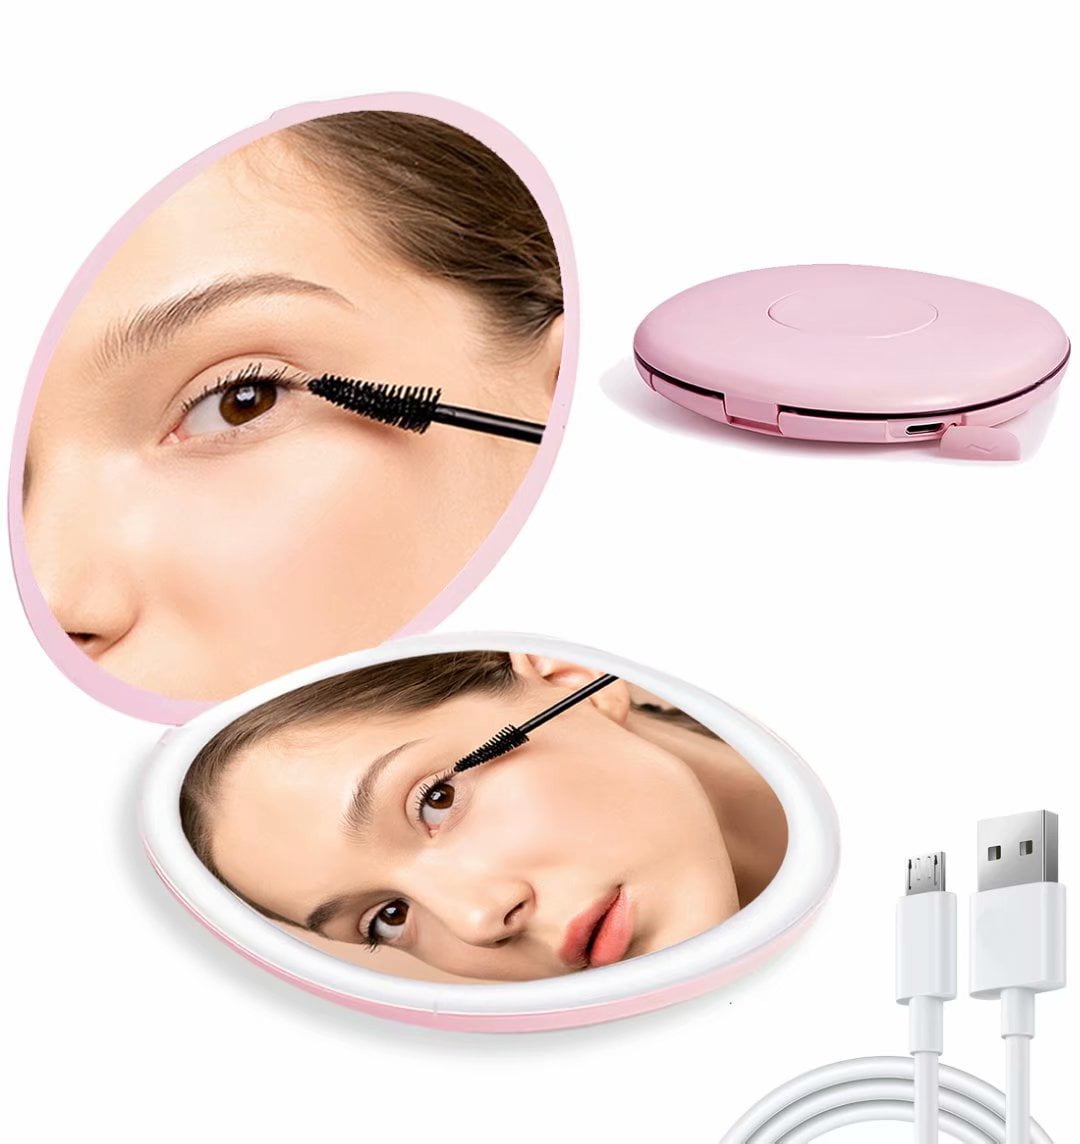 Dual Power Supply. Touch Sensor Dimming Mysmir Lighted Makeup Vanity Mirror with 5X Magnifying Mirror,LED Mirror with Shelf and Small Lighted Wall Hanging Mirror